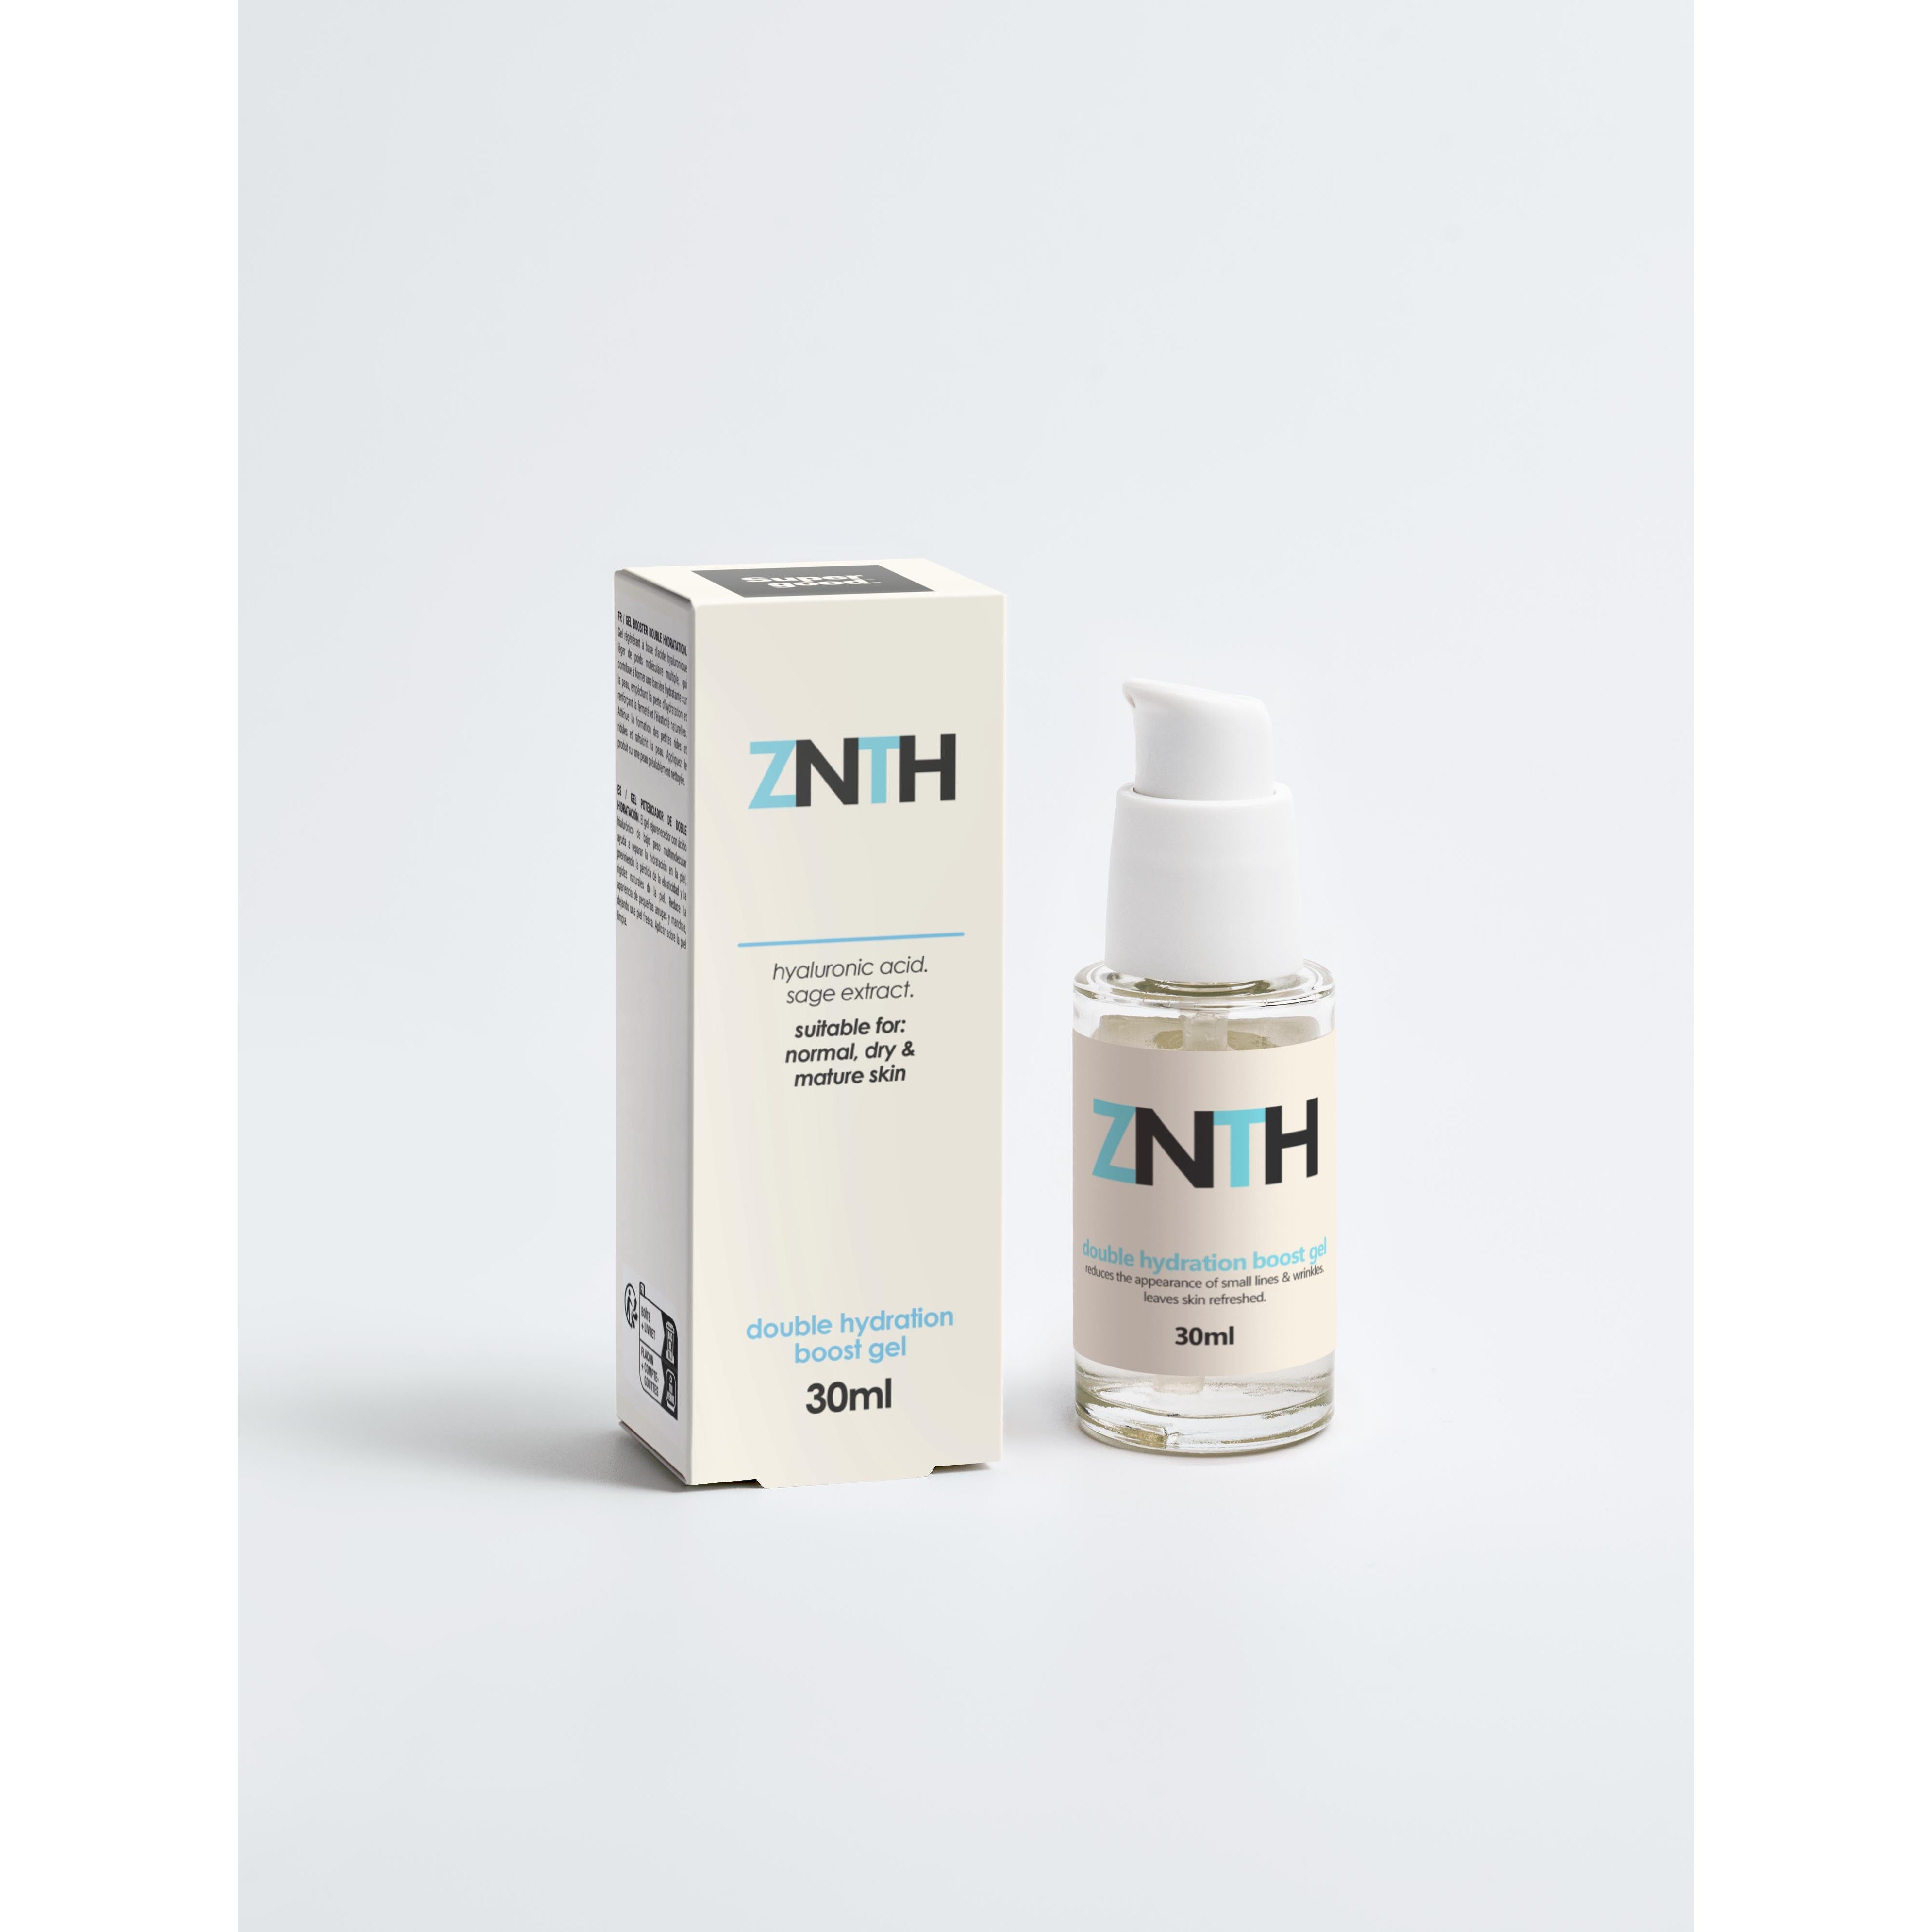 Double Hydration Boost Gel by ZNTH.